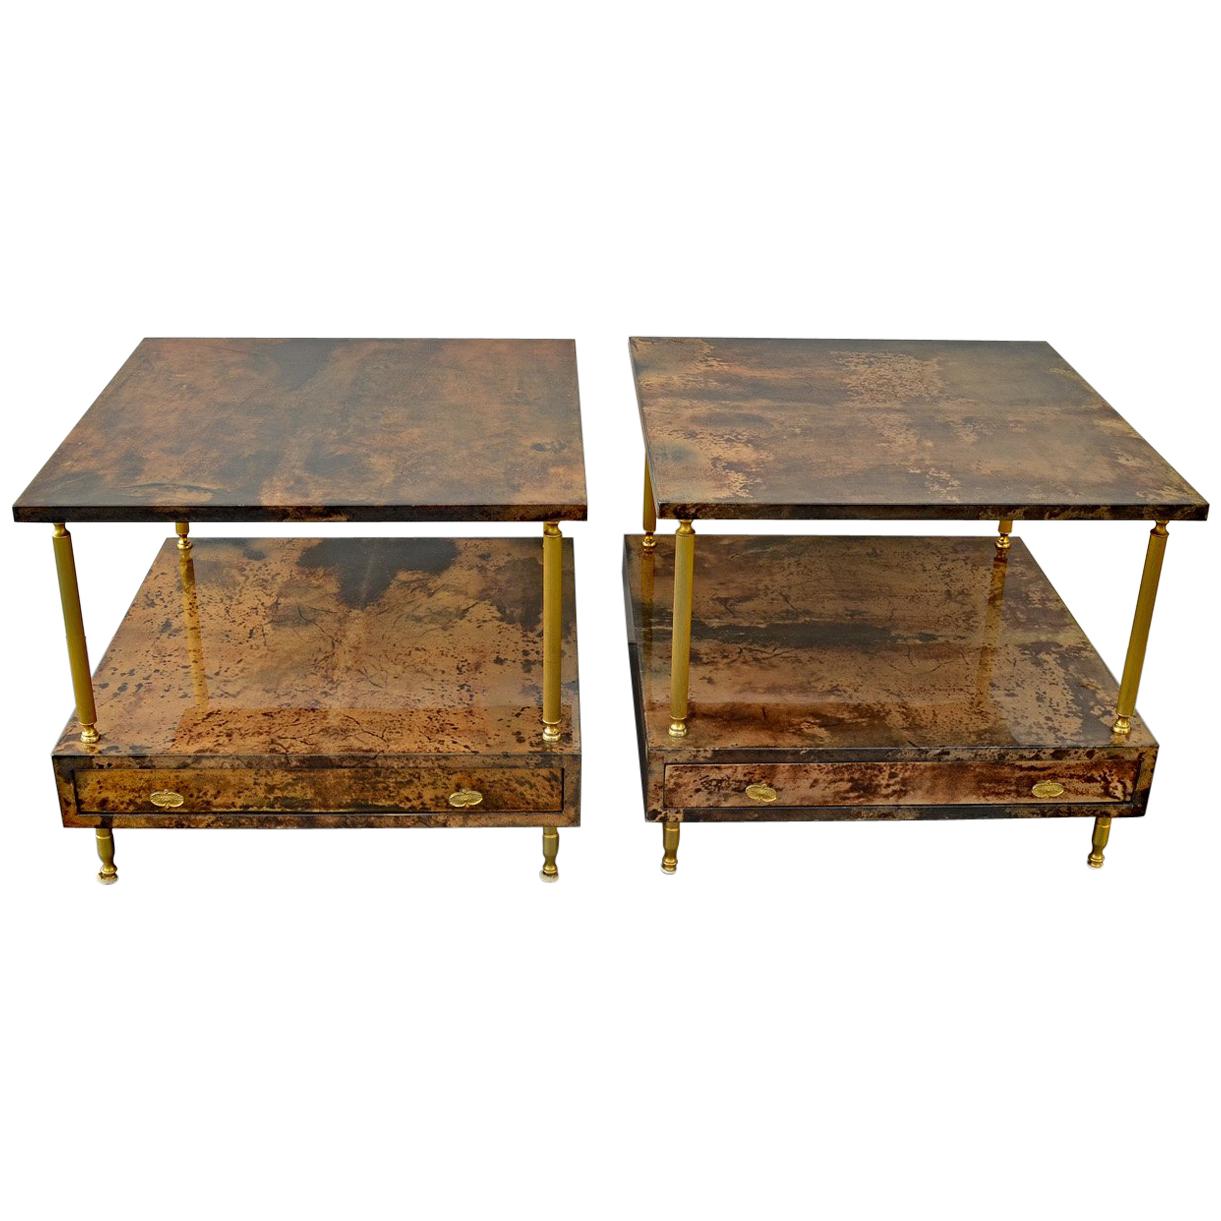 2 Nightstands by Aldo Tura for Tura Milano, Italy, Midcentury Brown Goatskin For Sale